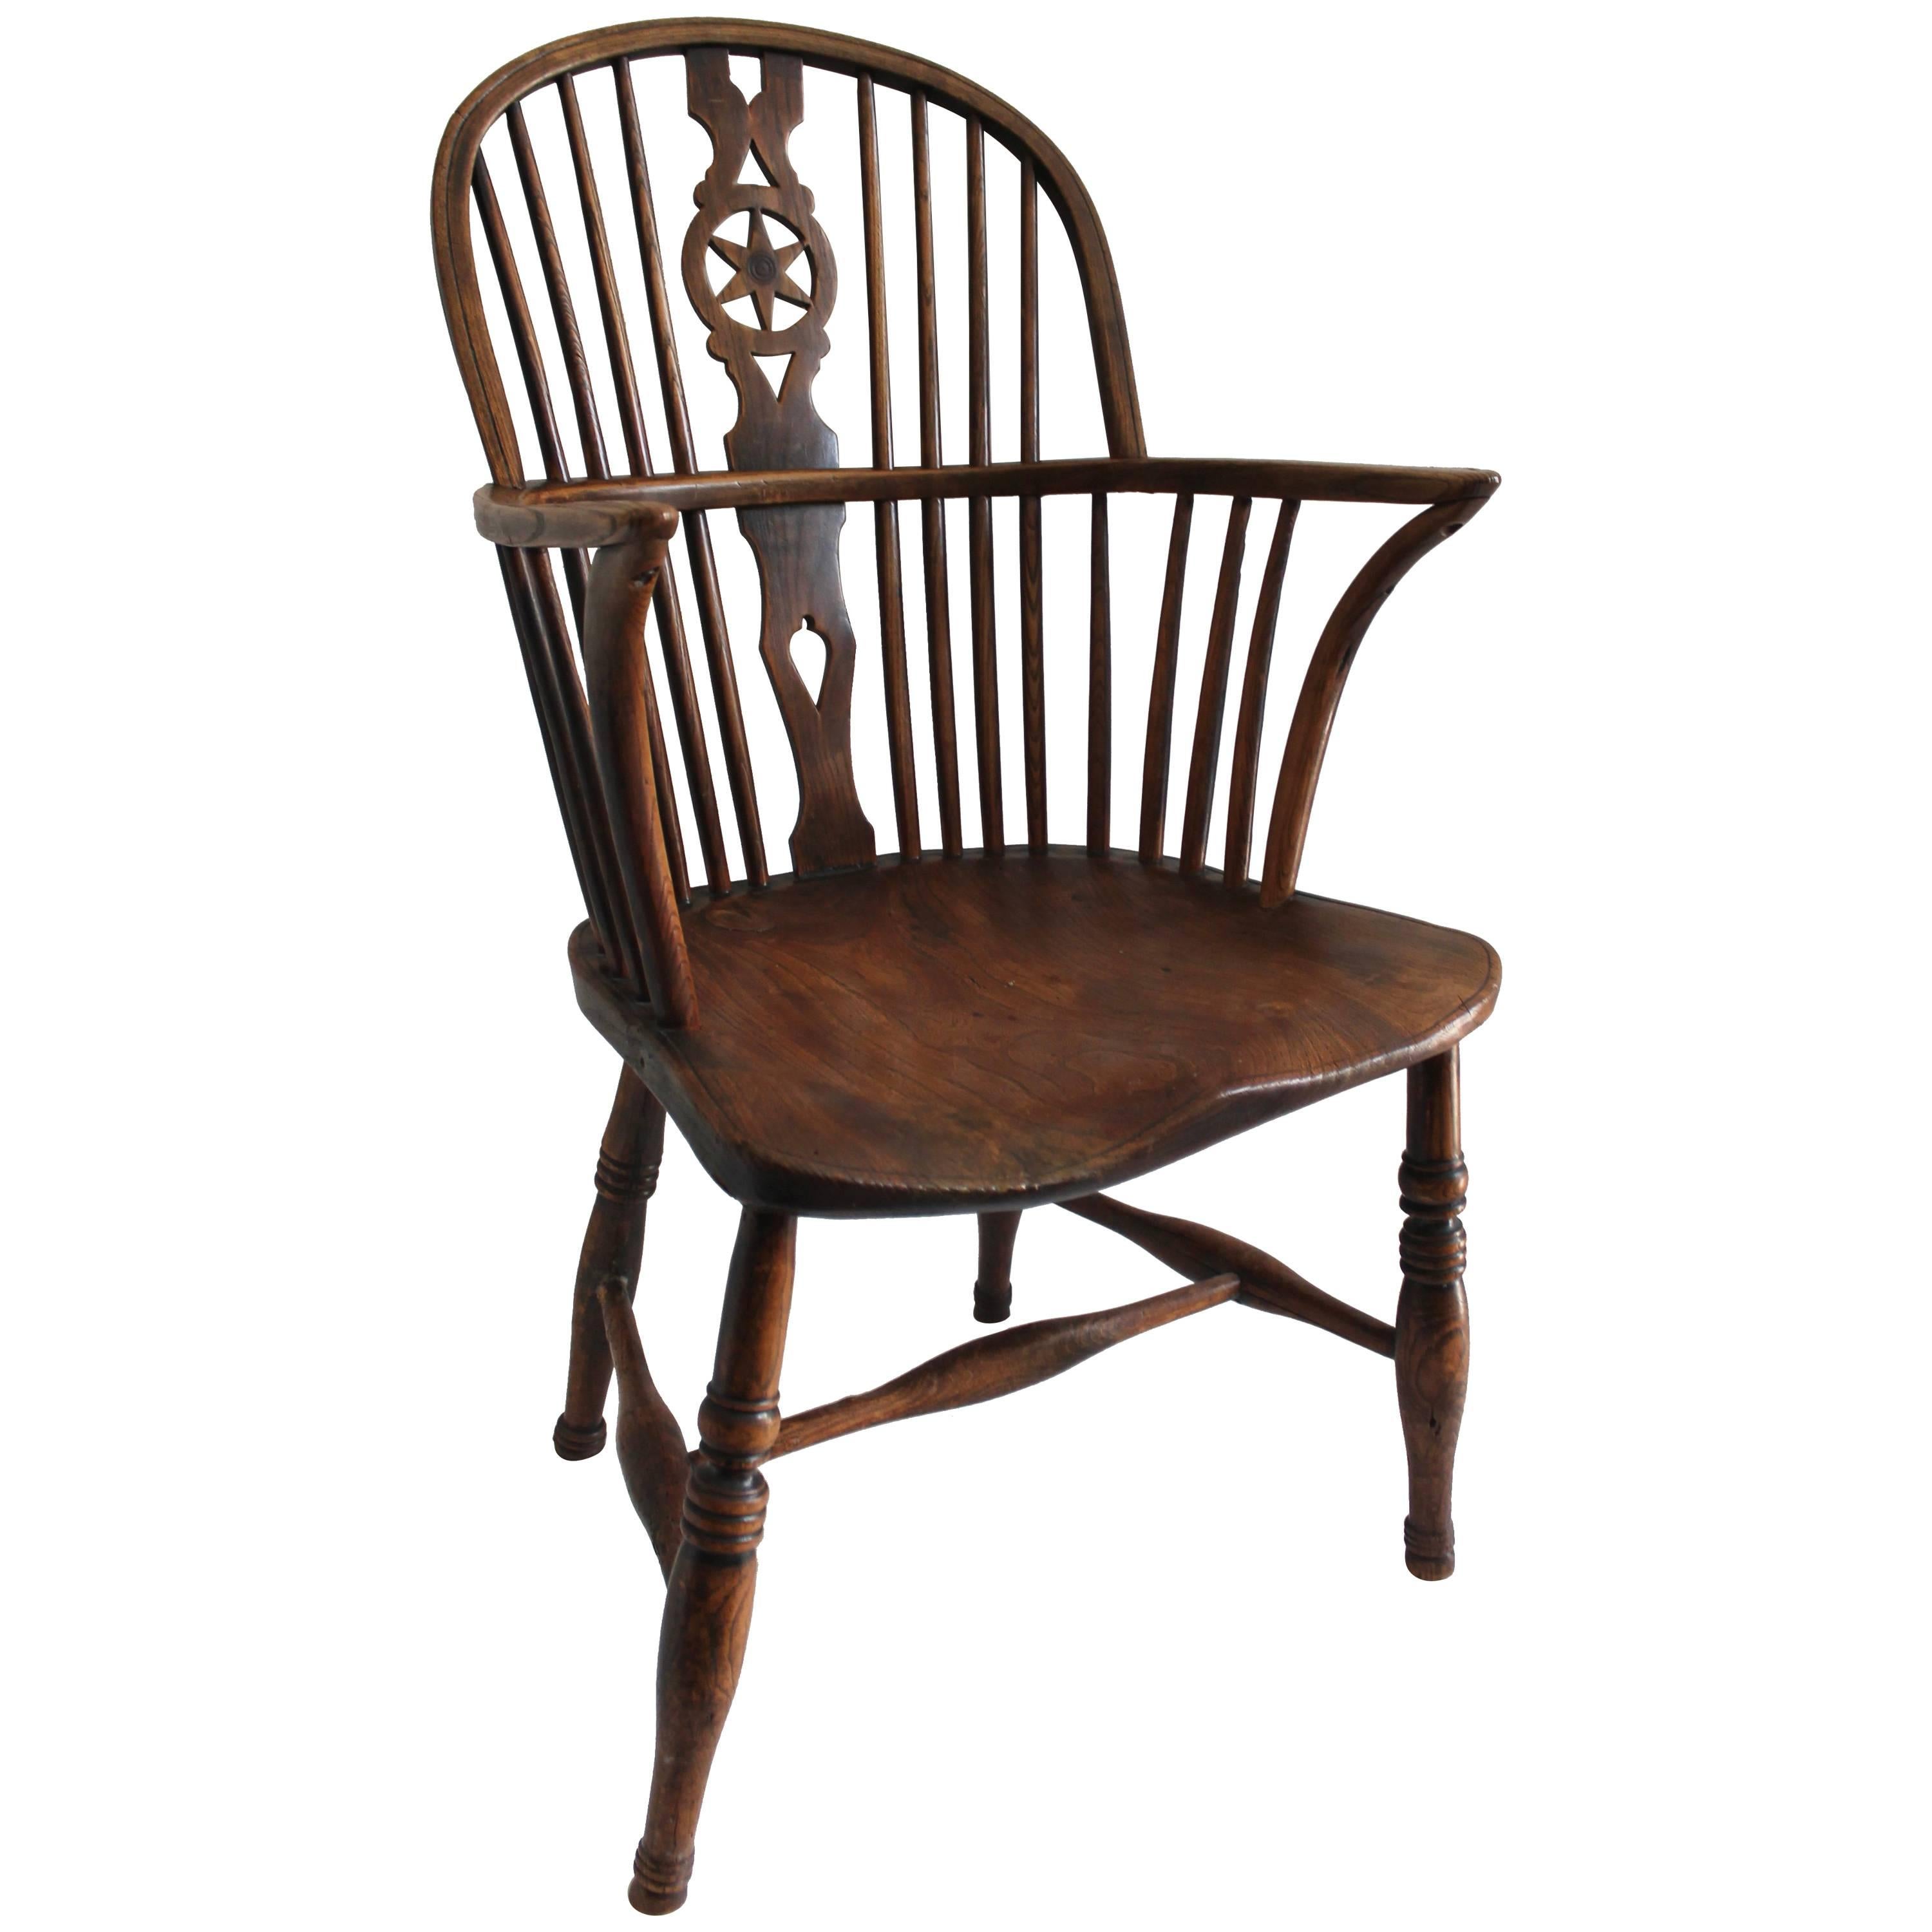 Early 19th Century English Windsor Chair with Star Back Splash